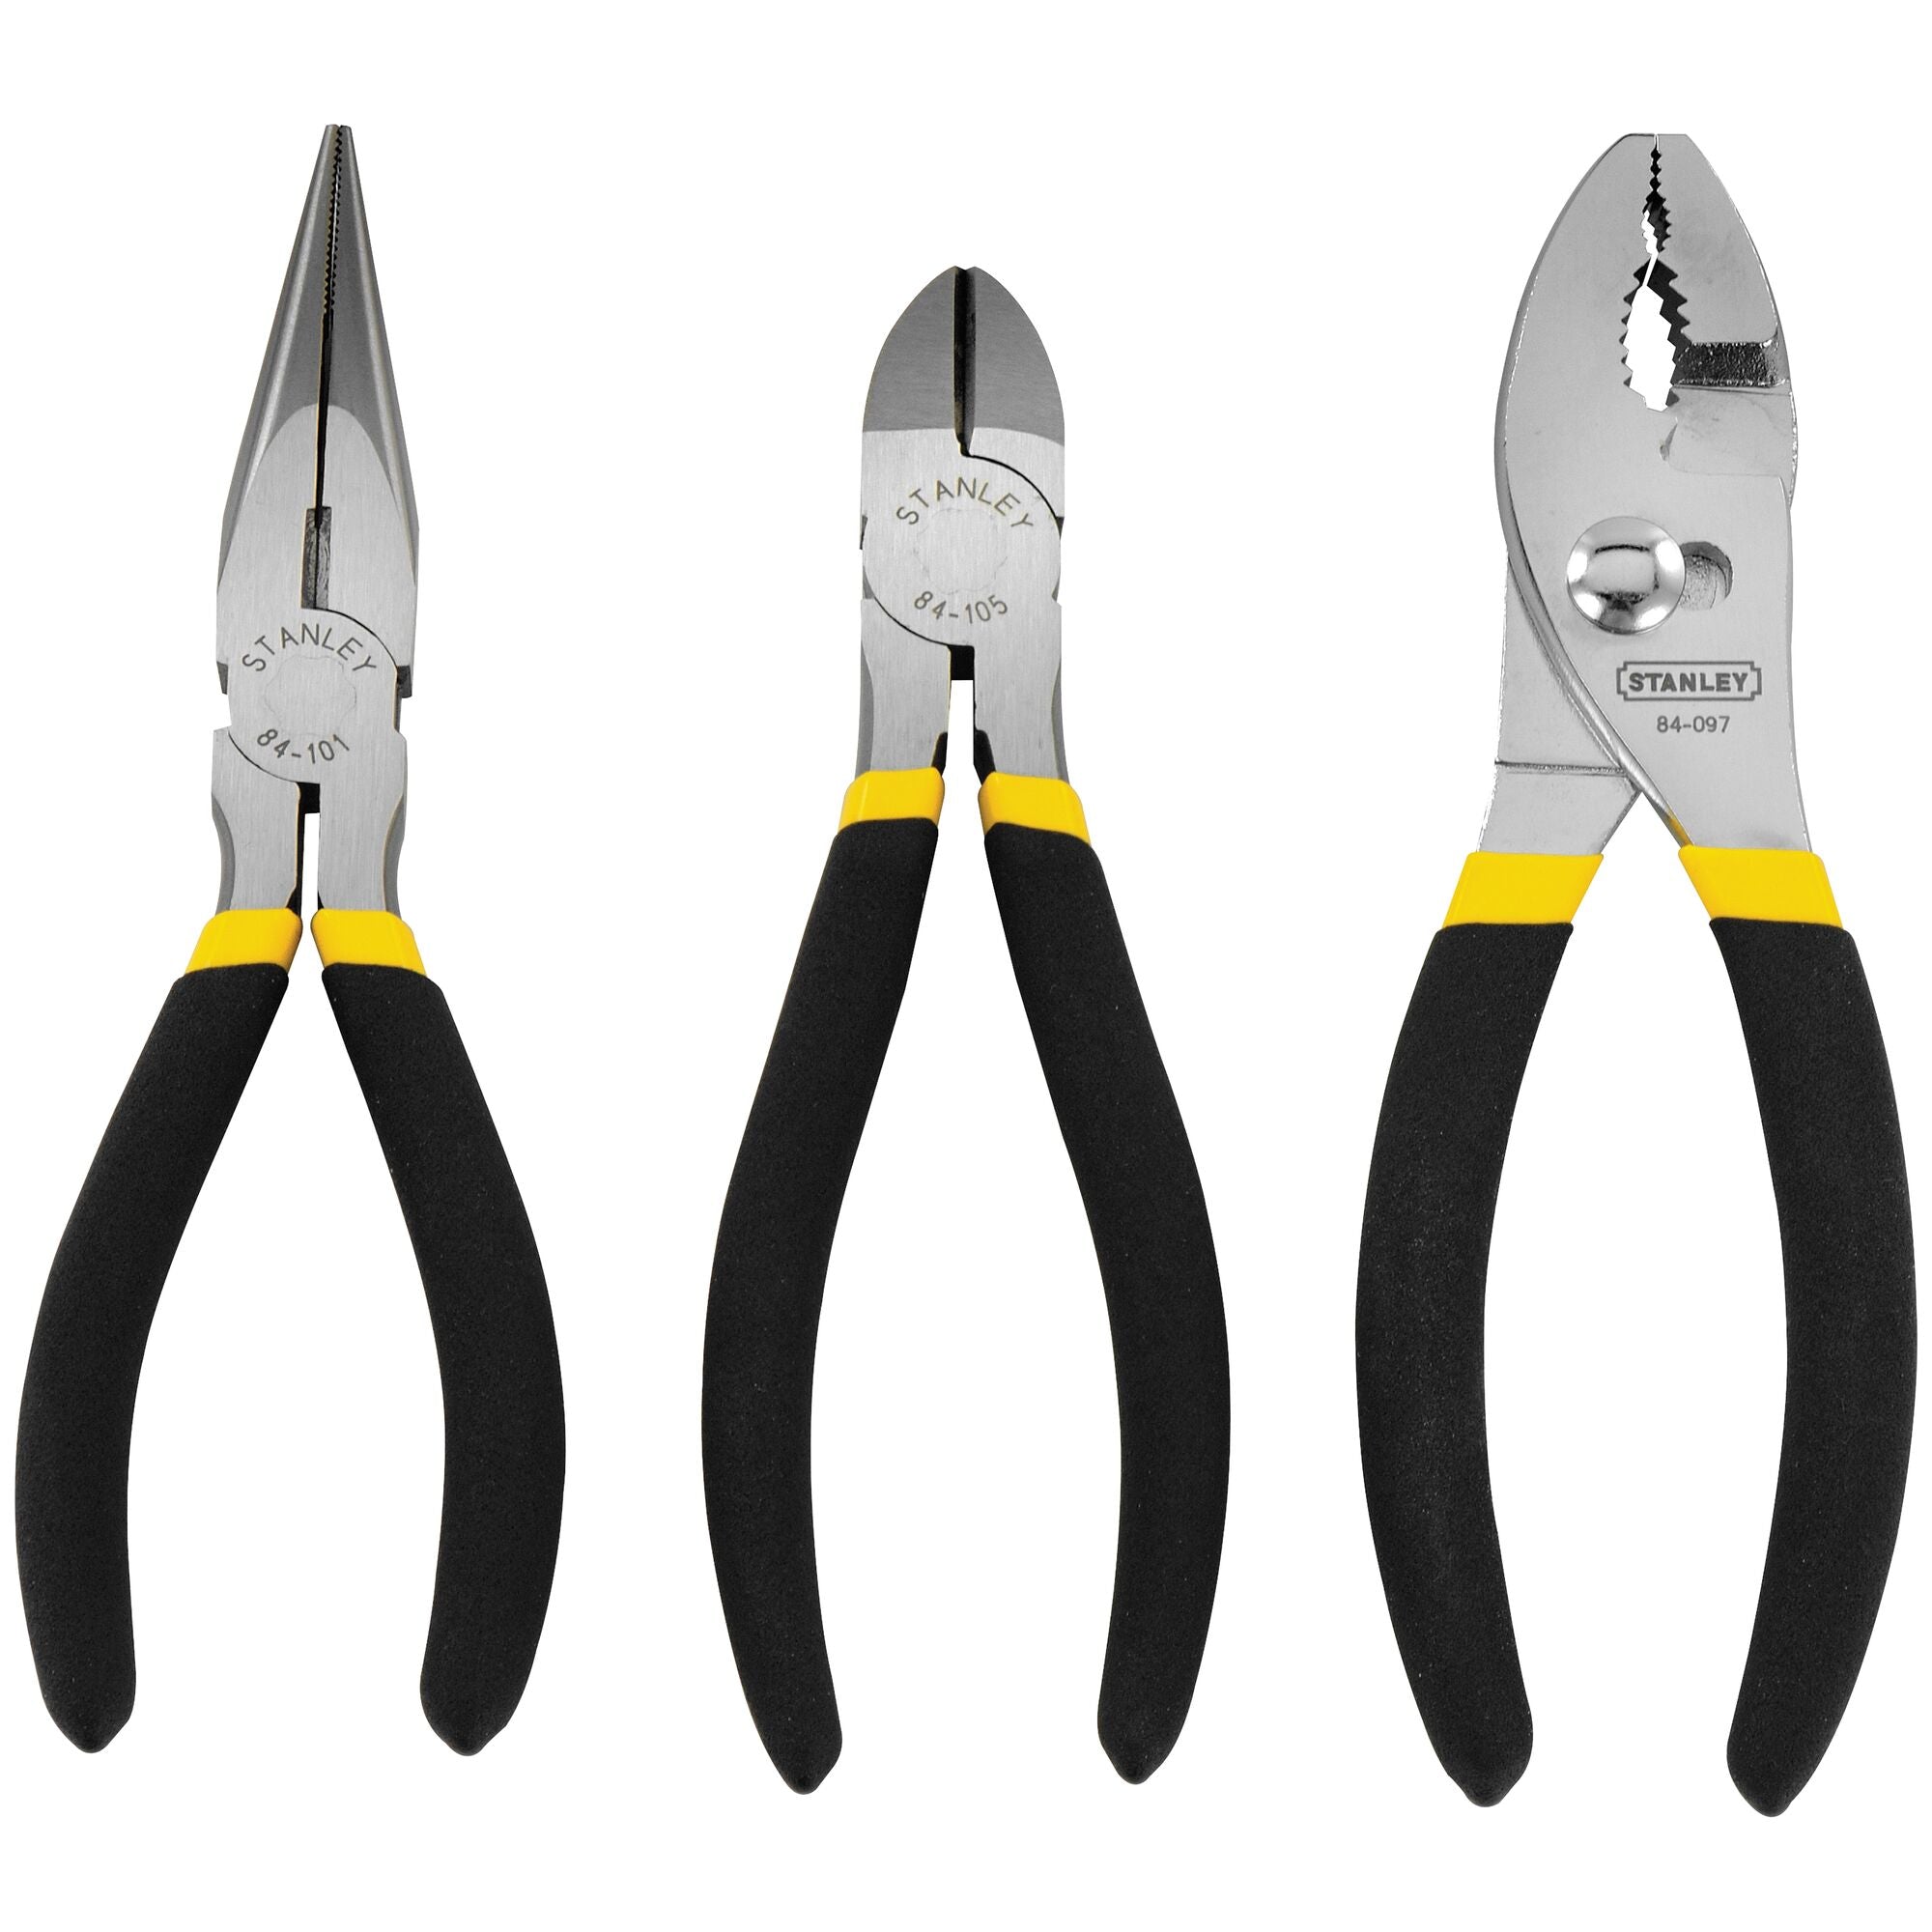 Pliers Set 3 Pc. Needle Nose, Diagonal Cutter, Slip Joint Pliers.  All 6 Inch